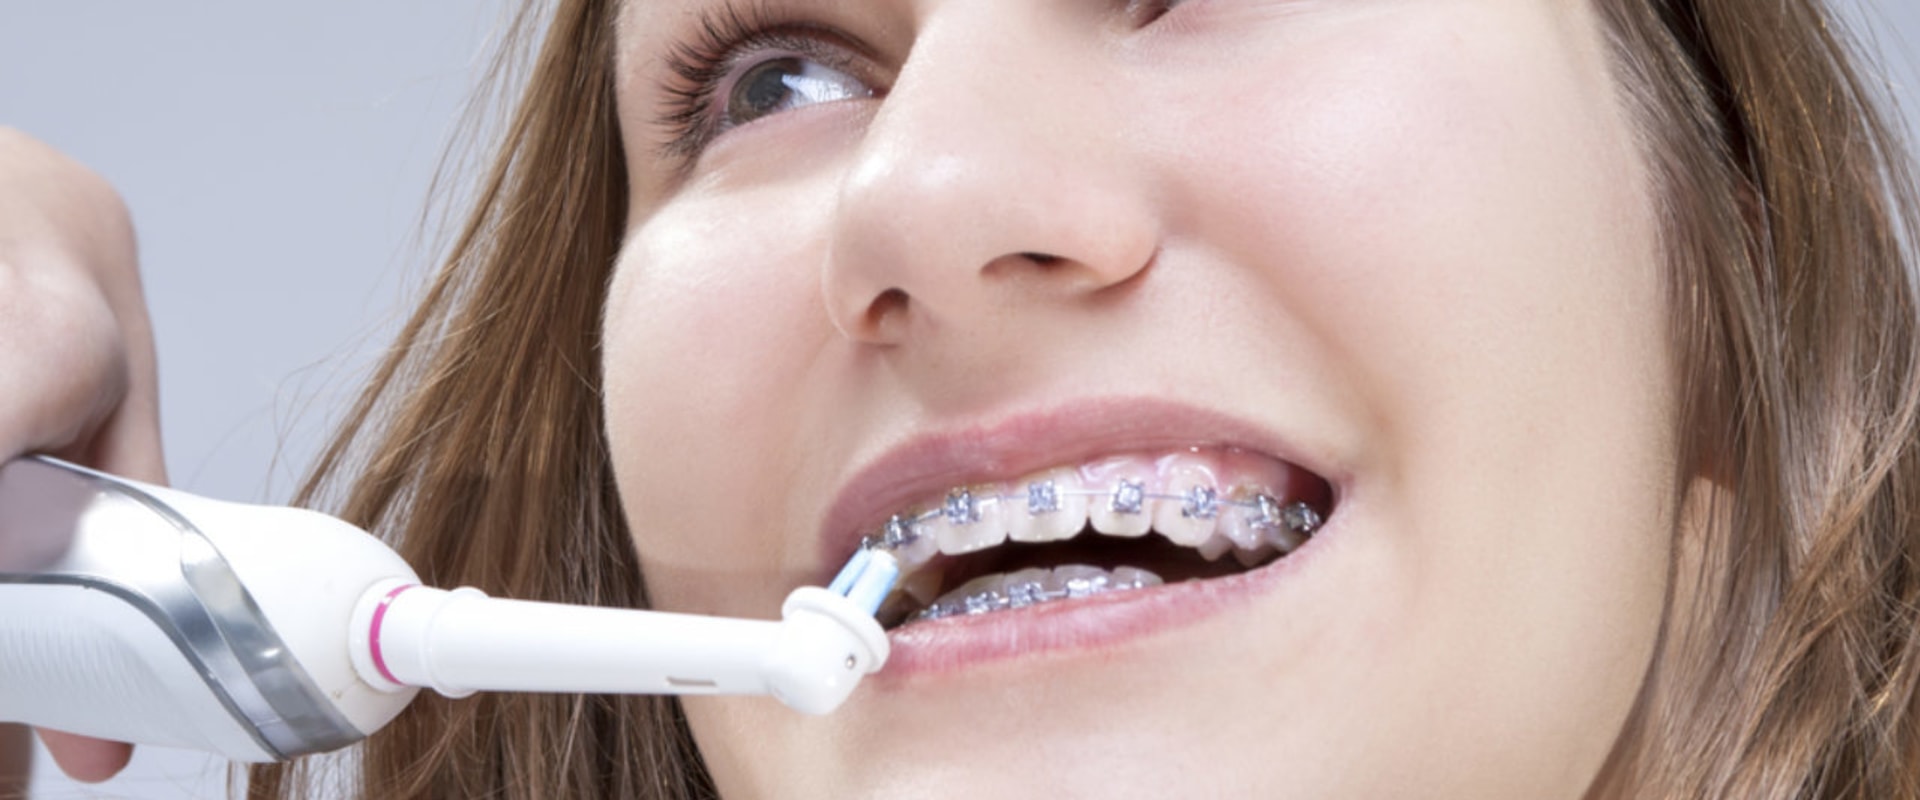 Maintaining Oral Health During Orthodontic Treatment: Tips for a Successful Journey